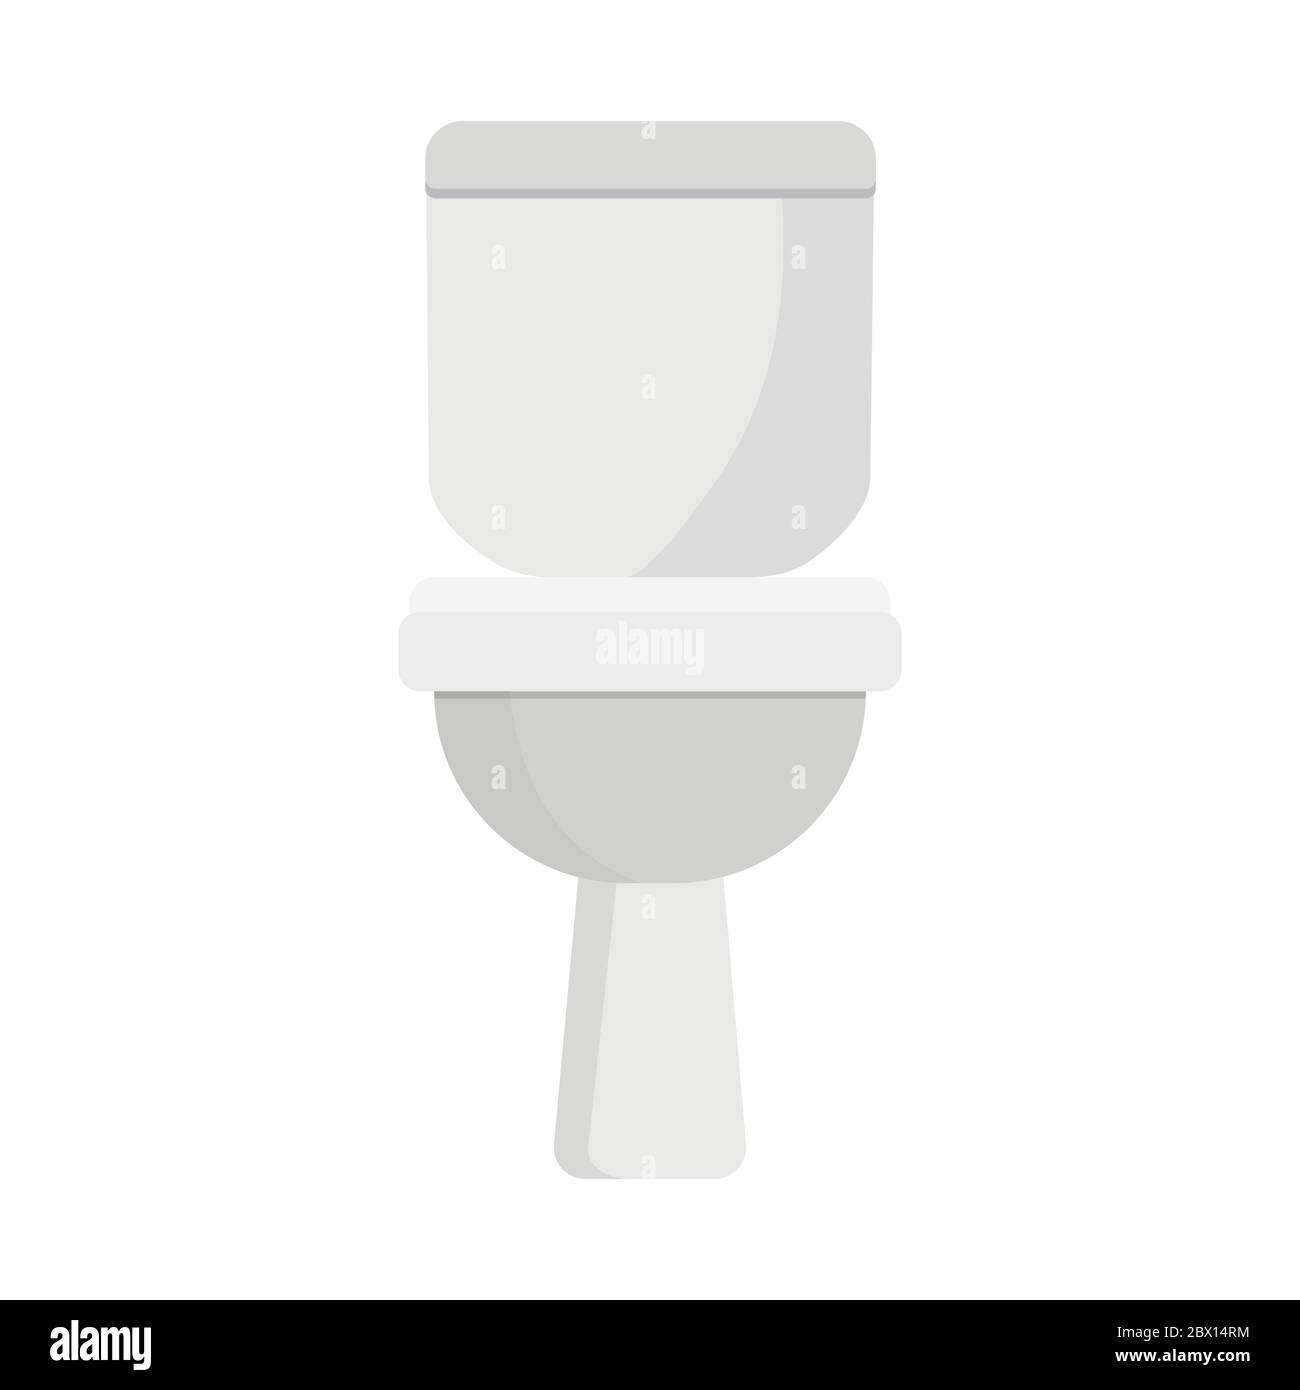 Toilet flat icon isolated on background.  Stock Vector